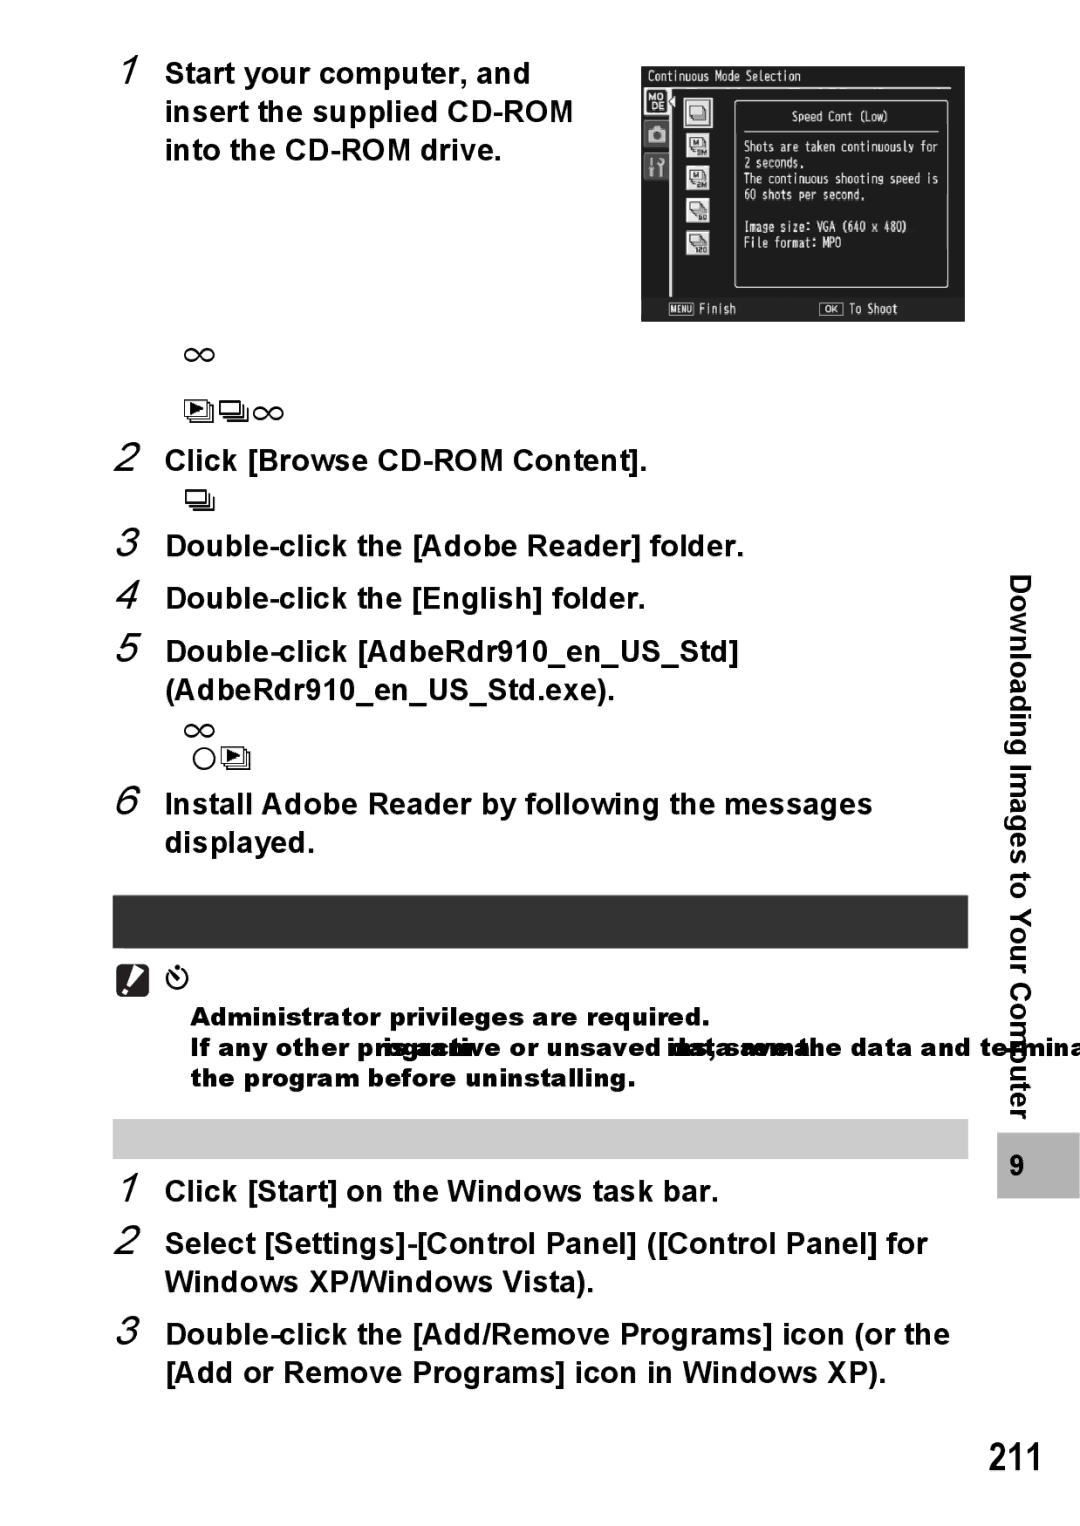 Samsung CX2 manual 211, Uninstalling the Software, Click Browse CD-ROM Content 